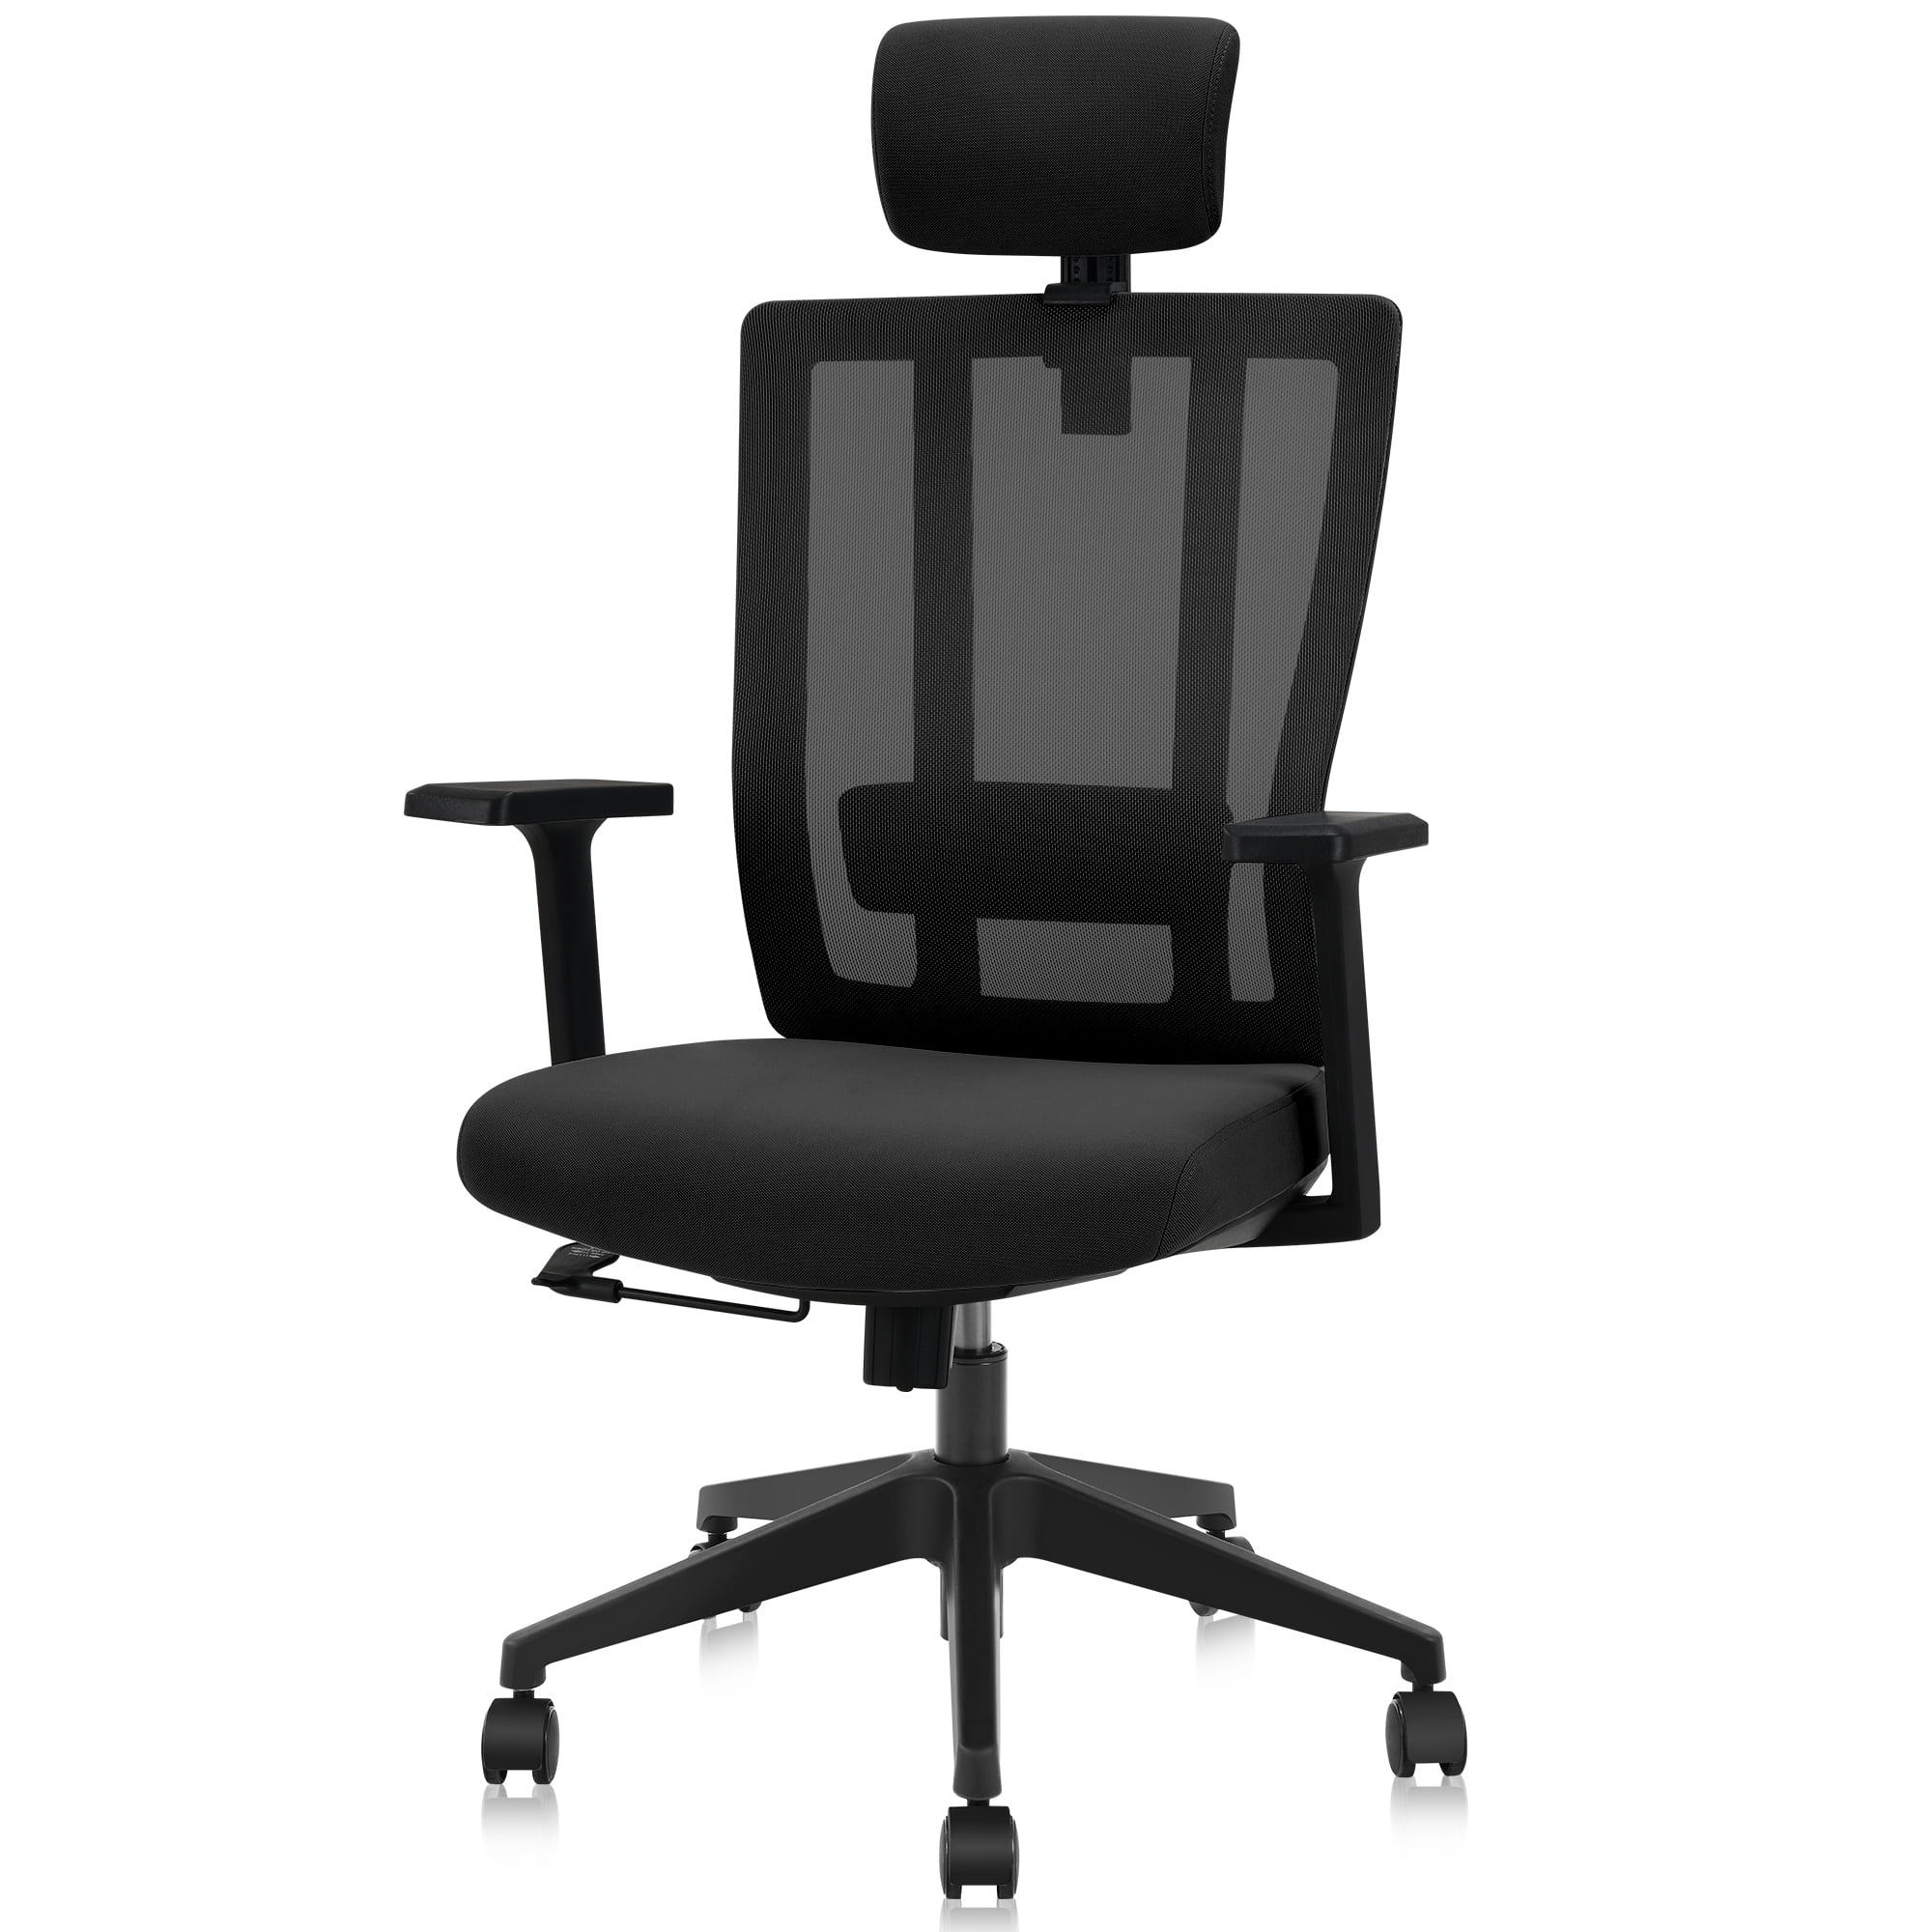 YITAHOME High Back Mesh Executive Chair Ergonomic w/ 3D Arm Rest Adjustable Seat 